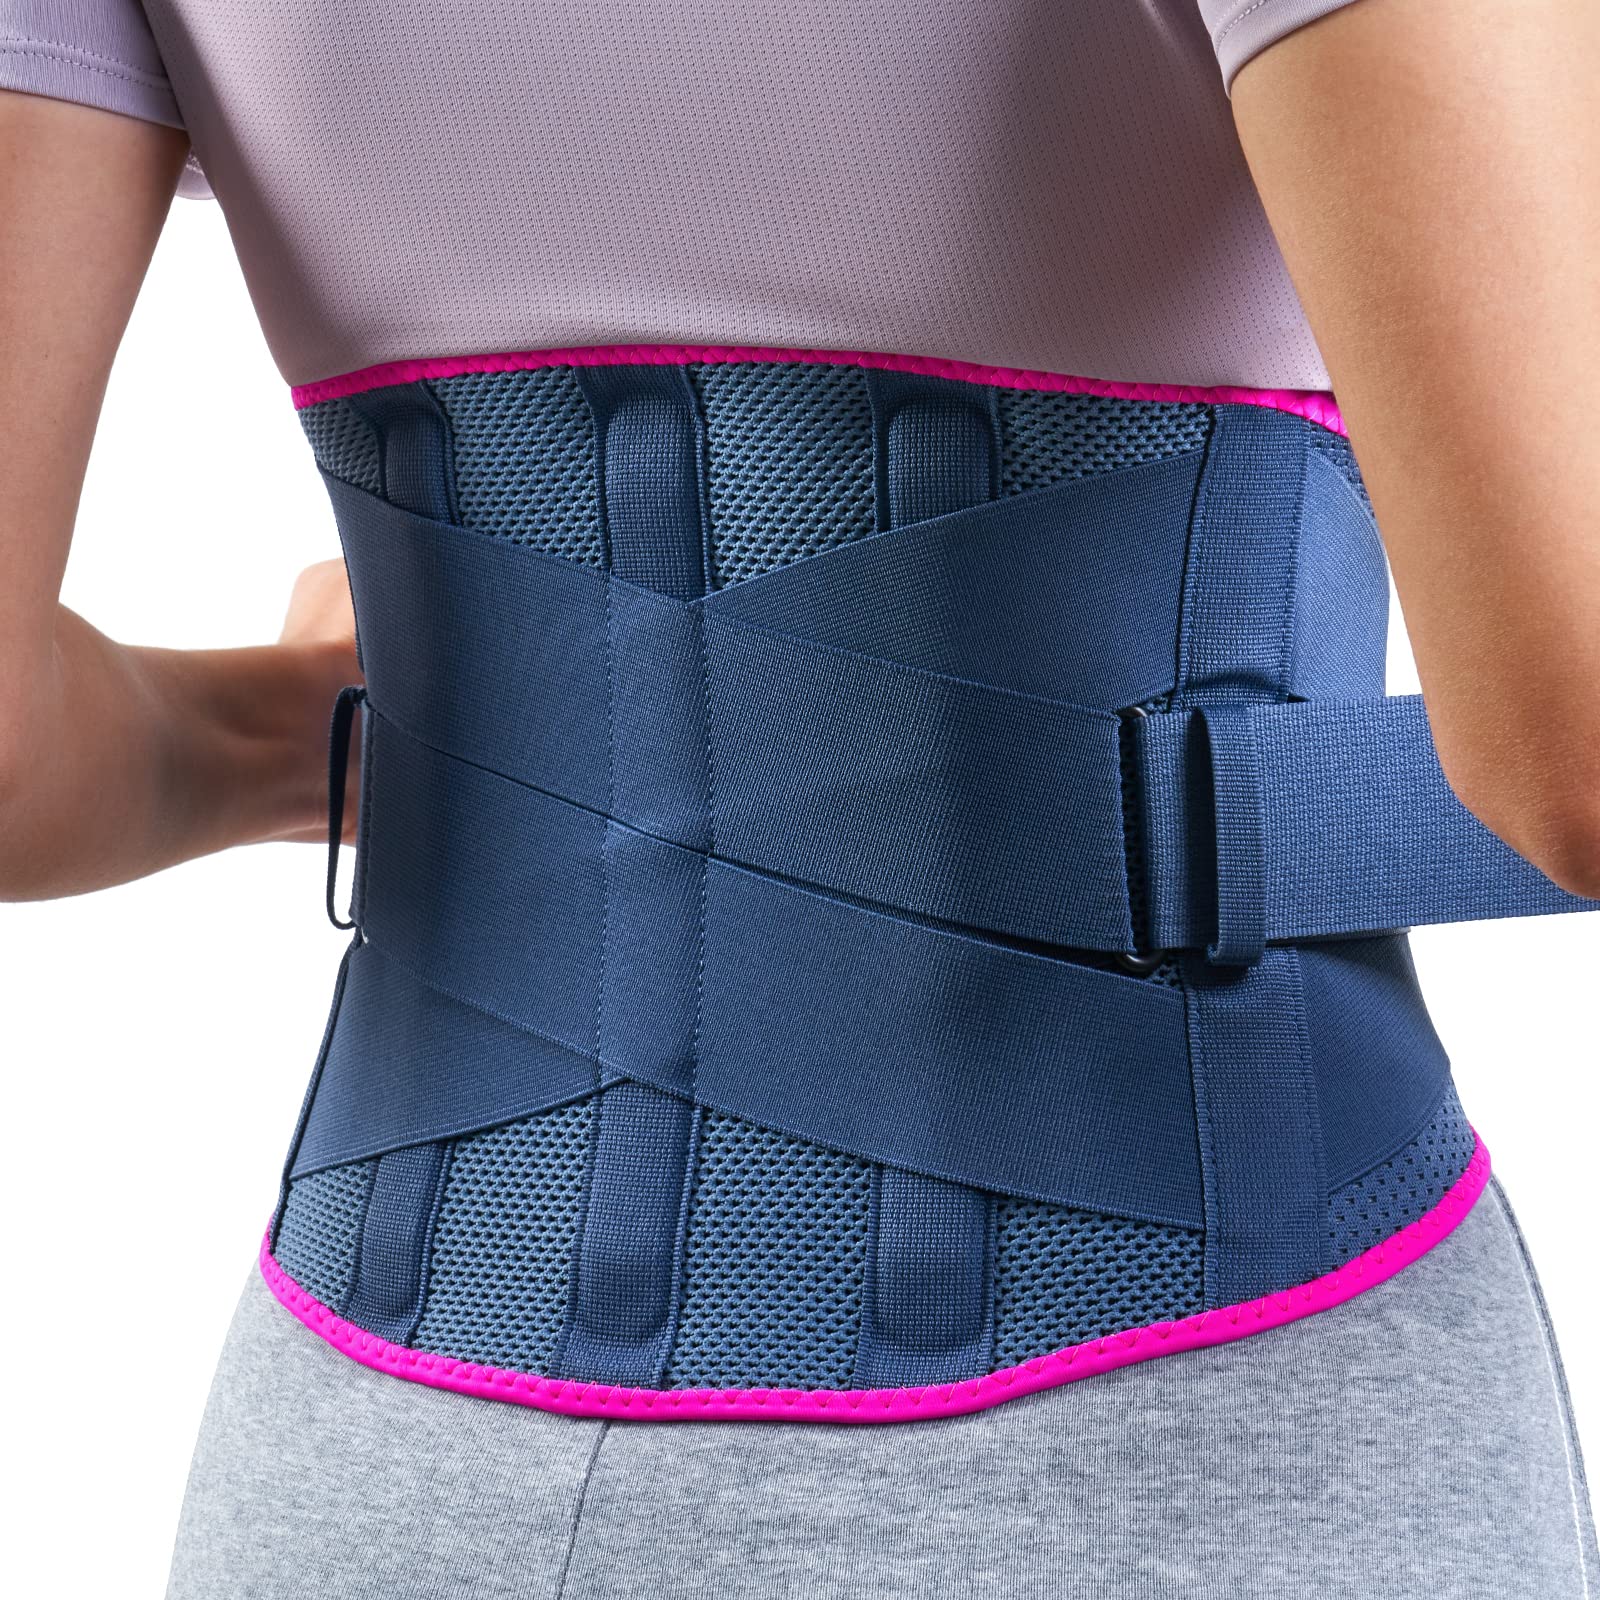 FREETOO Back Brace for Women Men Lower Back Pain Relief with 5 Anatomical  Stays, Knitted Back Support Belt for heavy lifting, Durable Lumbar Support  Brace for Sciatica Herniated Disc L(Waist size:41-51) Blue